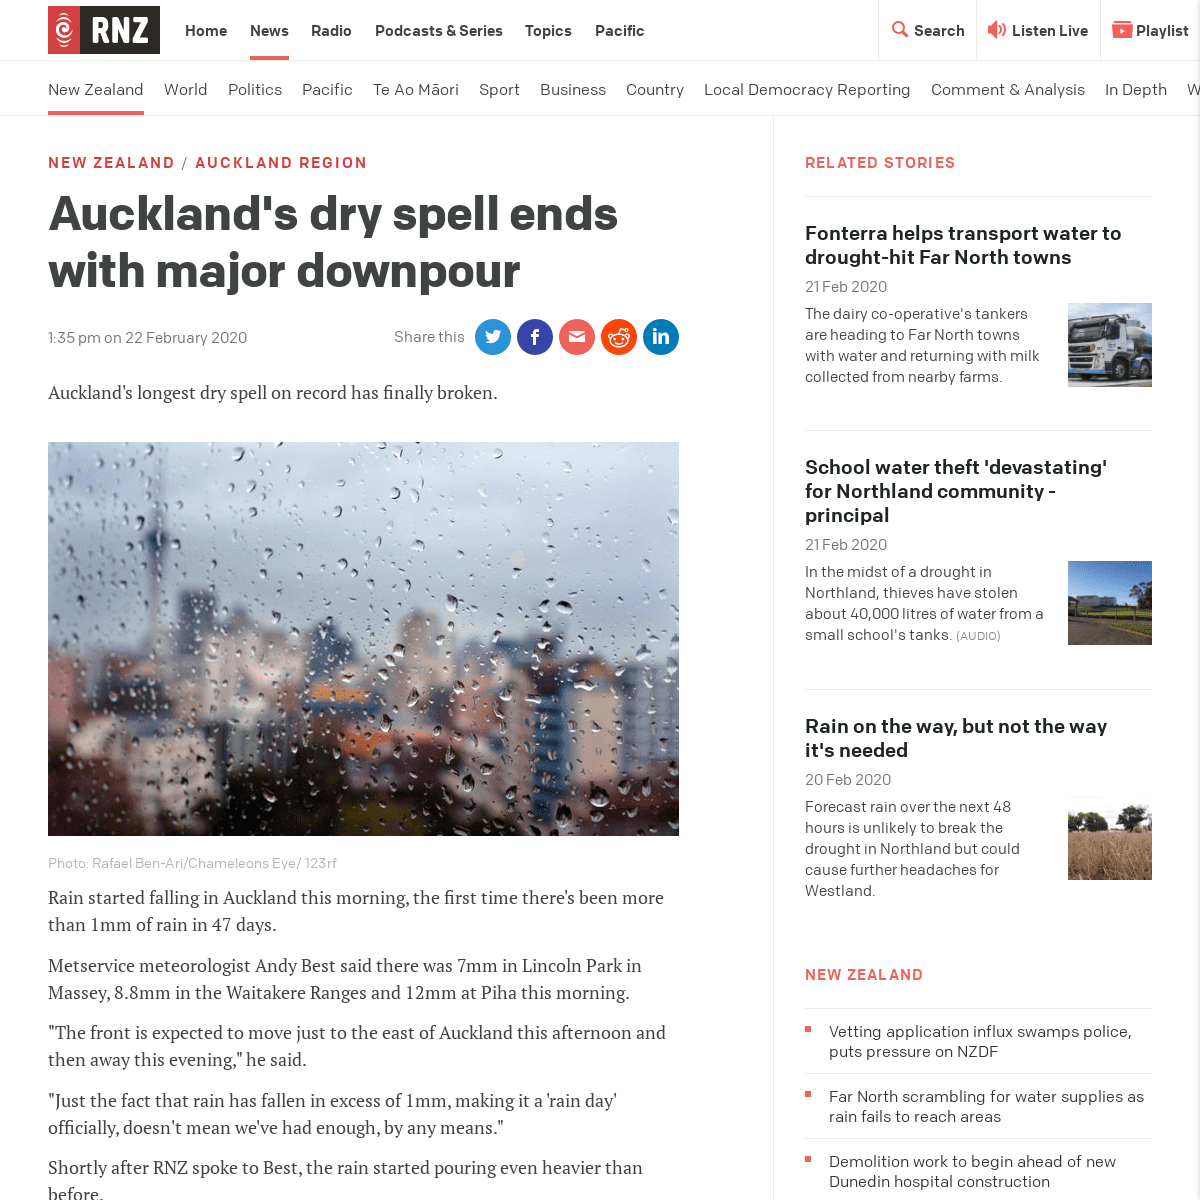 A complete backup of www.rnz.co.nz/news/national/410114/auckland-s-dry-spell-ends-with-major-downpour